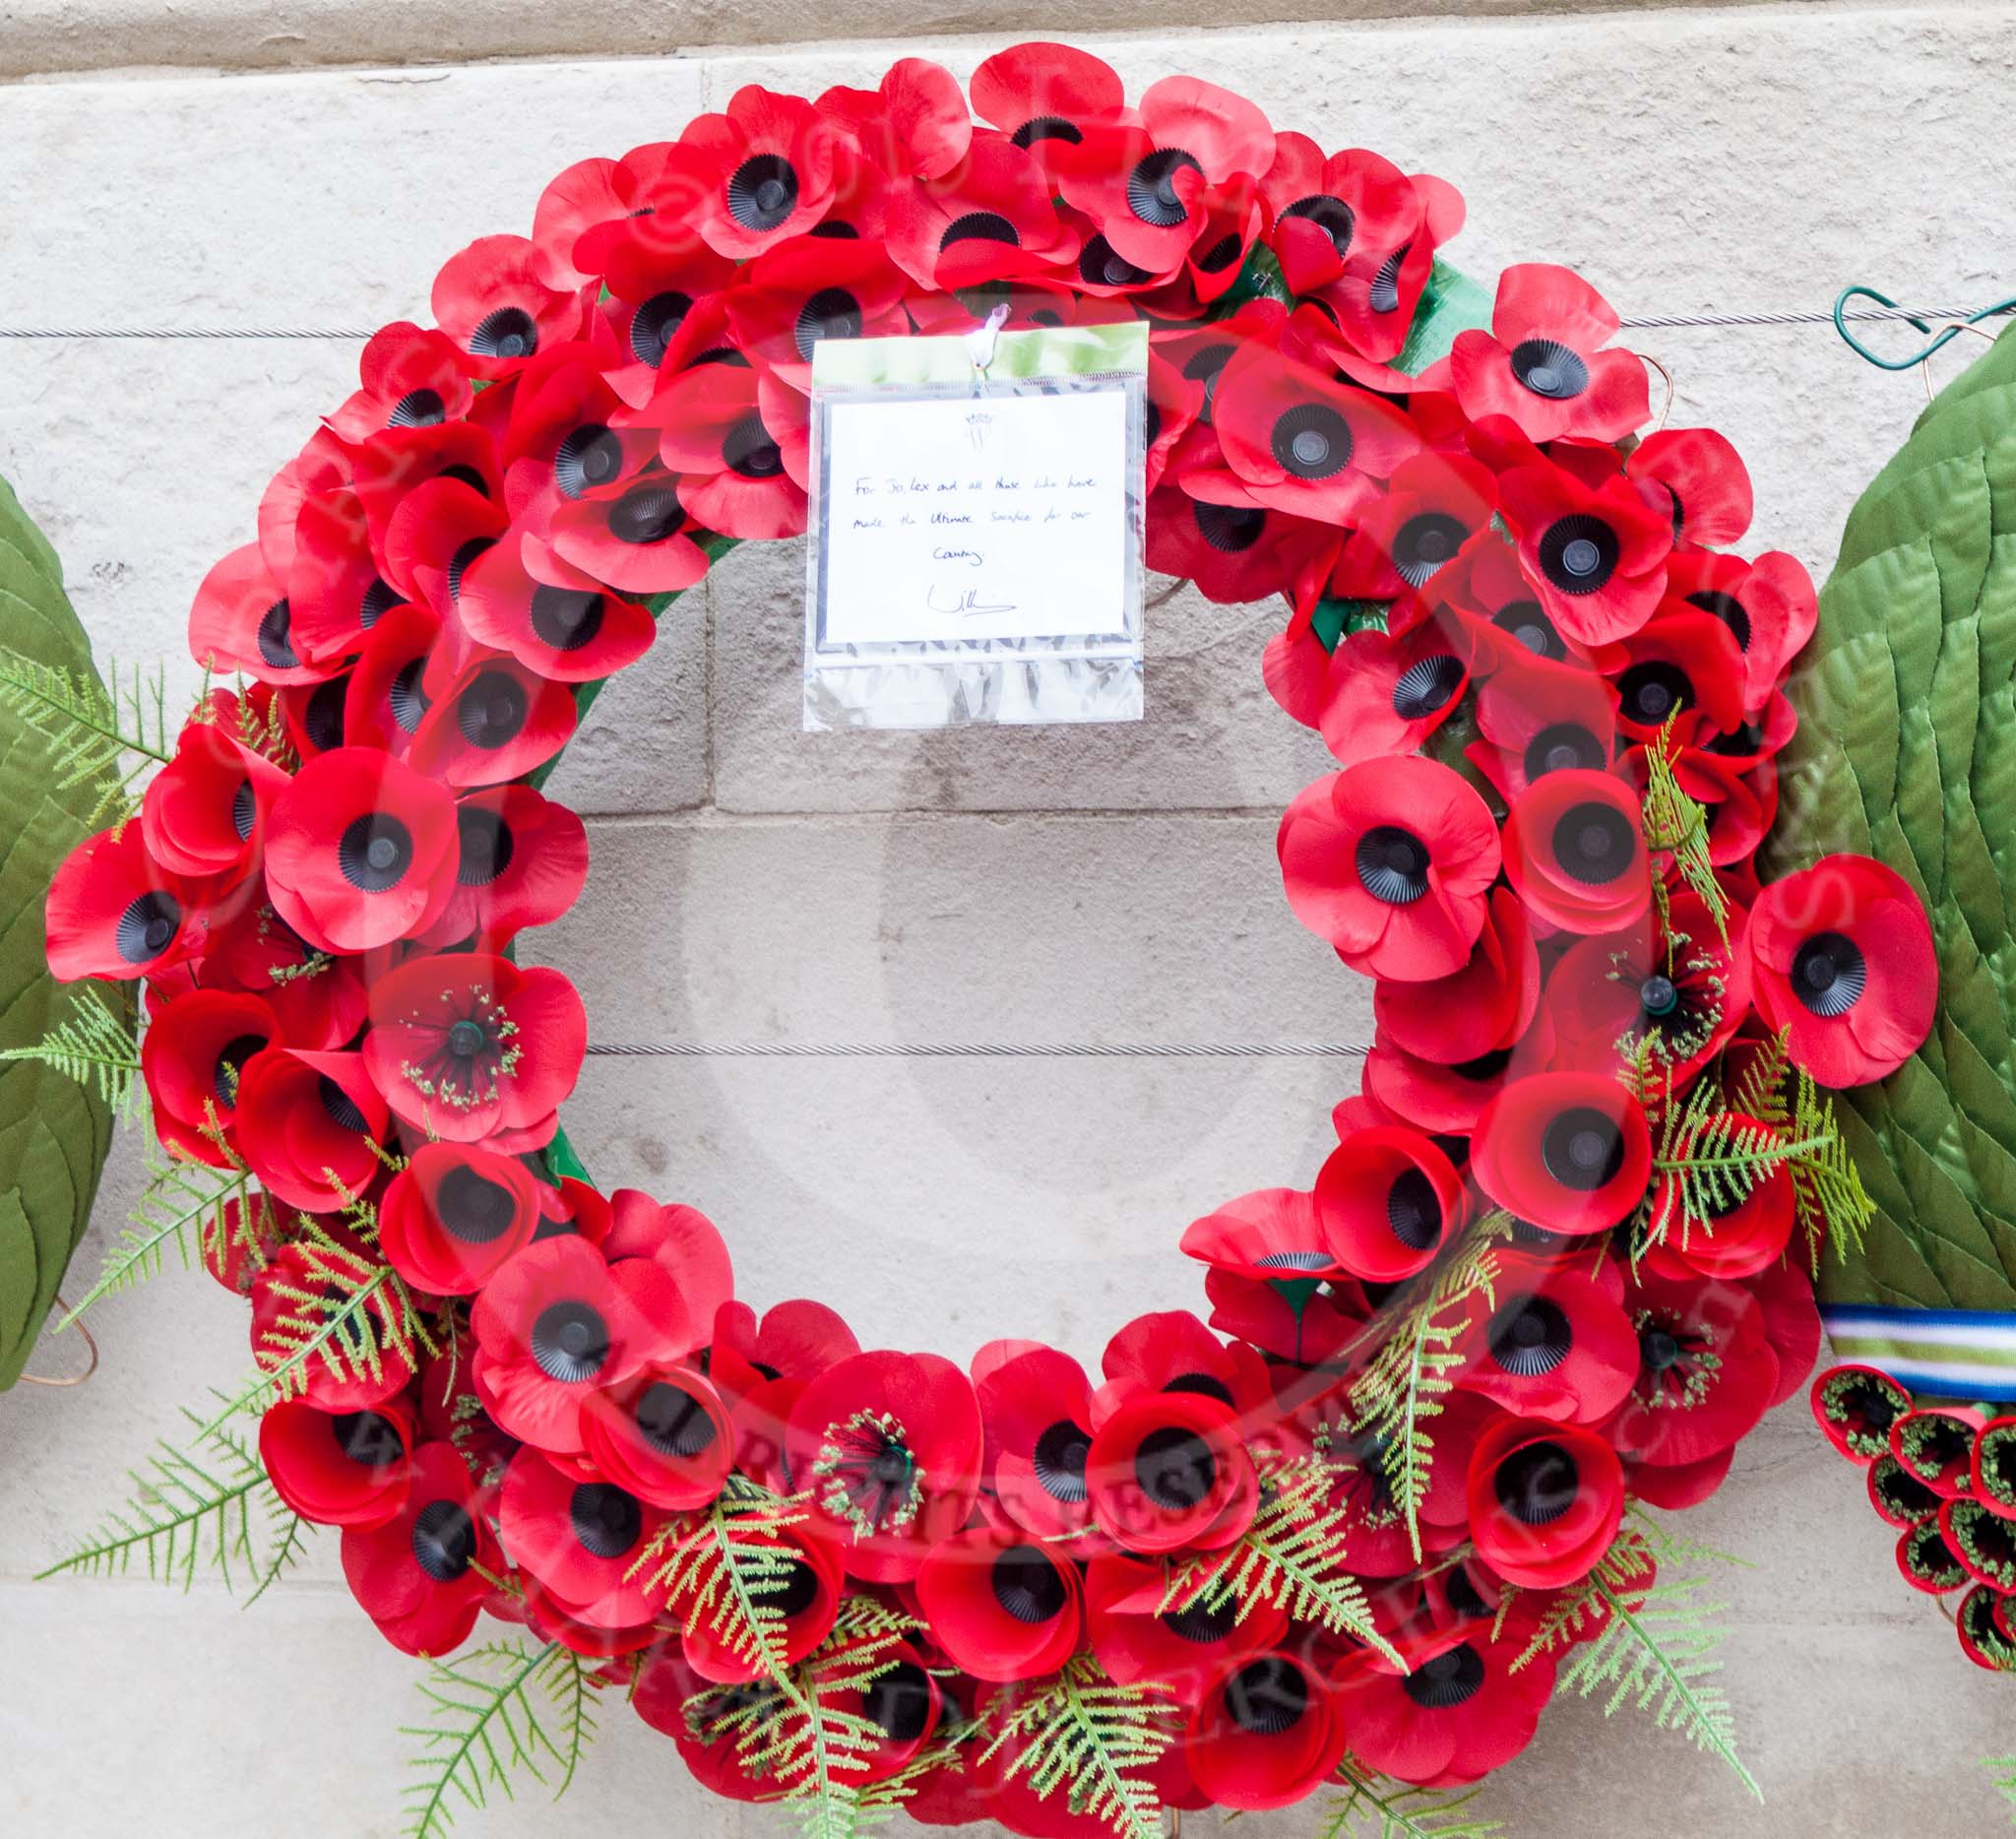 Remembrance Sunday at the Cenotaph 2015: The wreath laid by Prince William.
"For Jo, Lex(?) and all those that have made the Ultimate Sacrifice for our Country". Image #378, 08 November 2015 12:44 Whitehall, London, UK